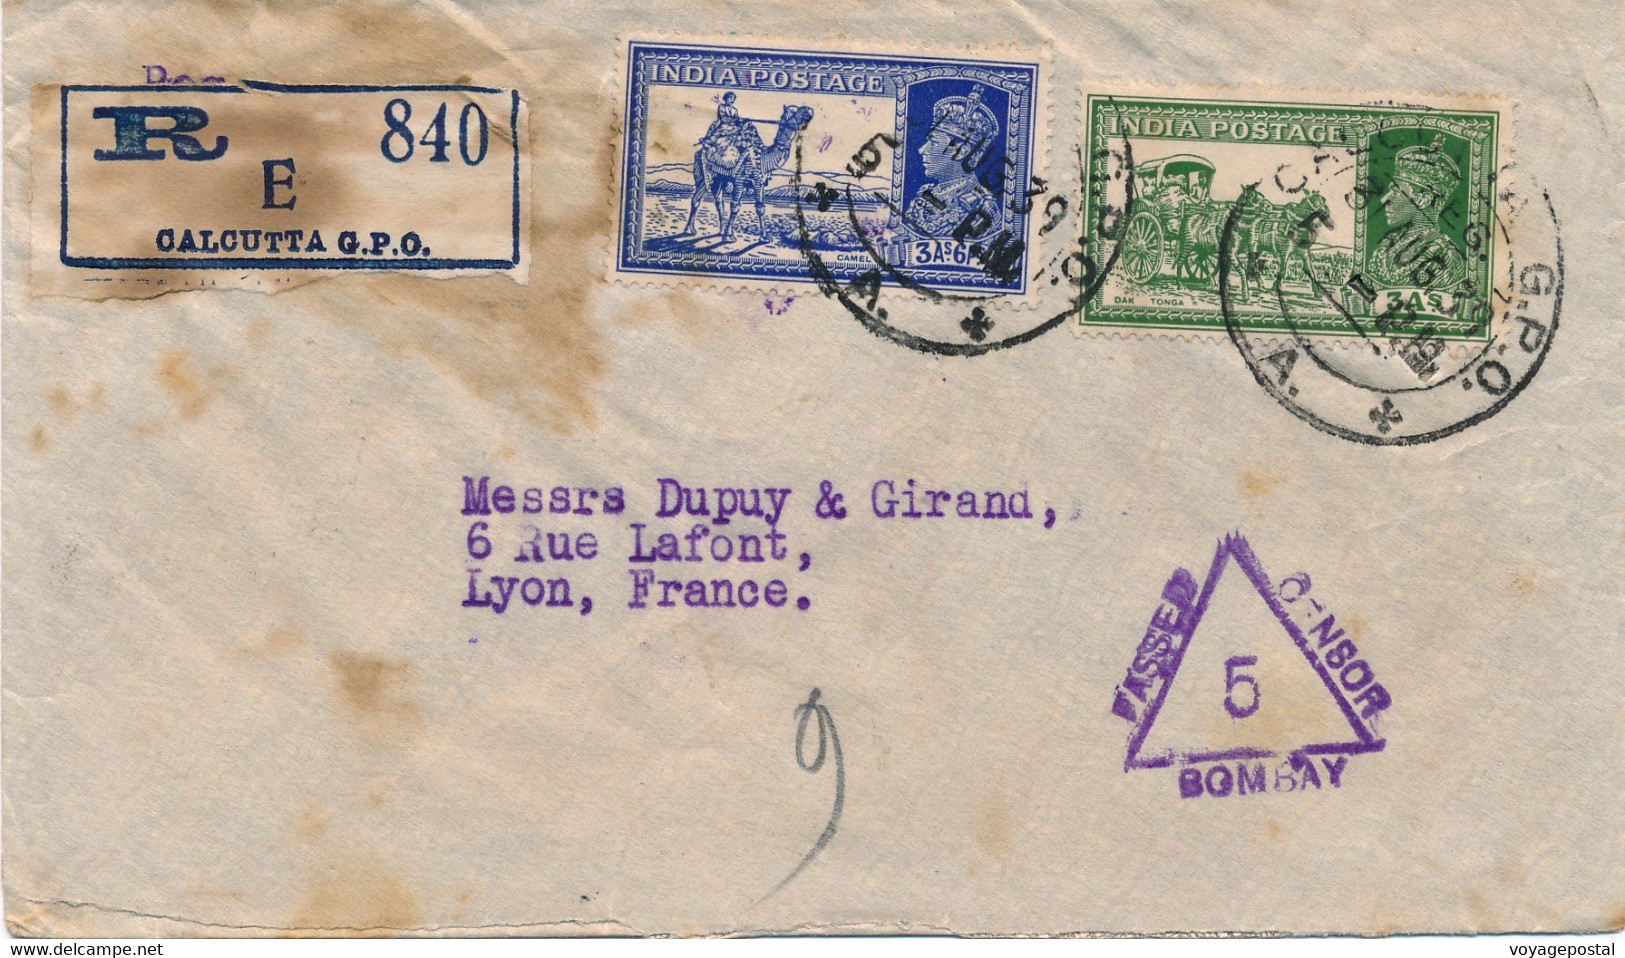 LETTRE RECOMMANDÉE CALCUTTA INDE PASSED CENSOR BOMBAY FRANCE CINDERELLA BANK COVER INDIA - 1936-47 King George VI